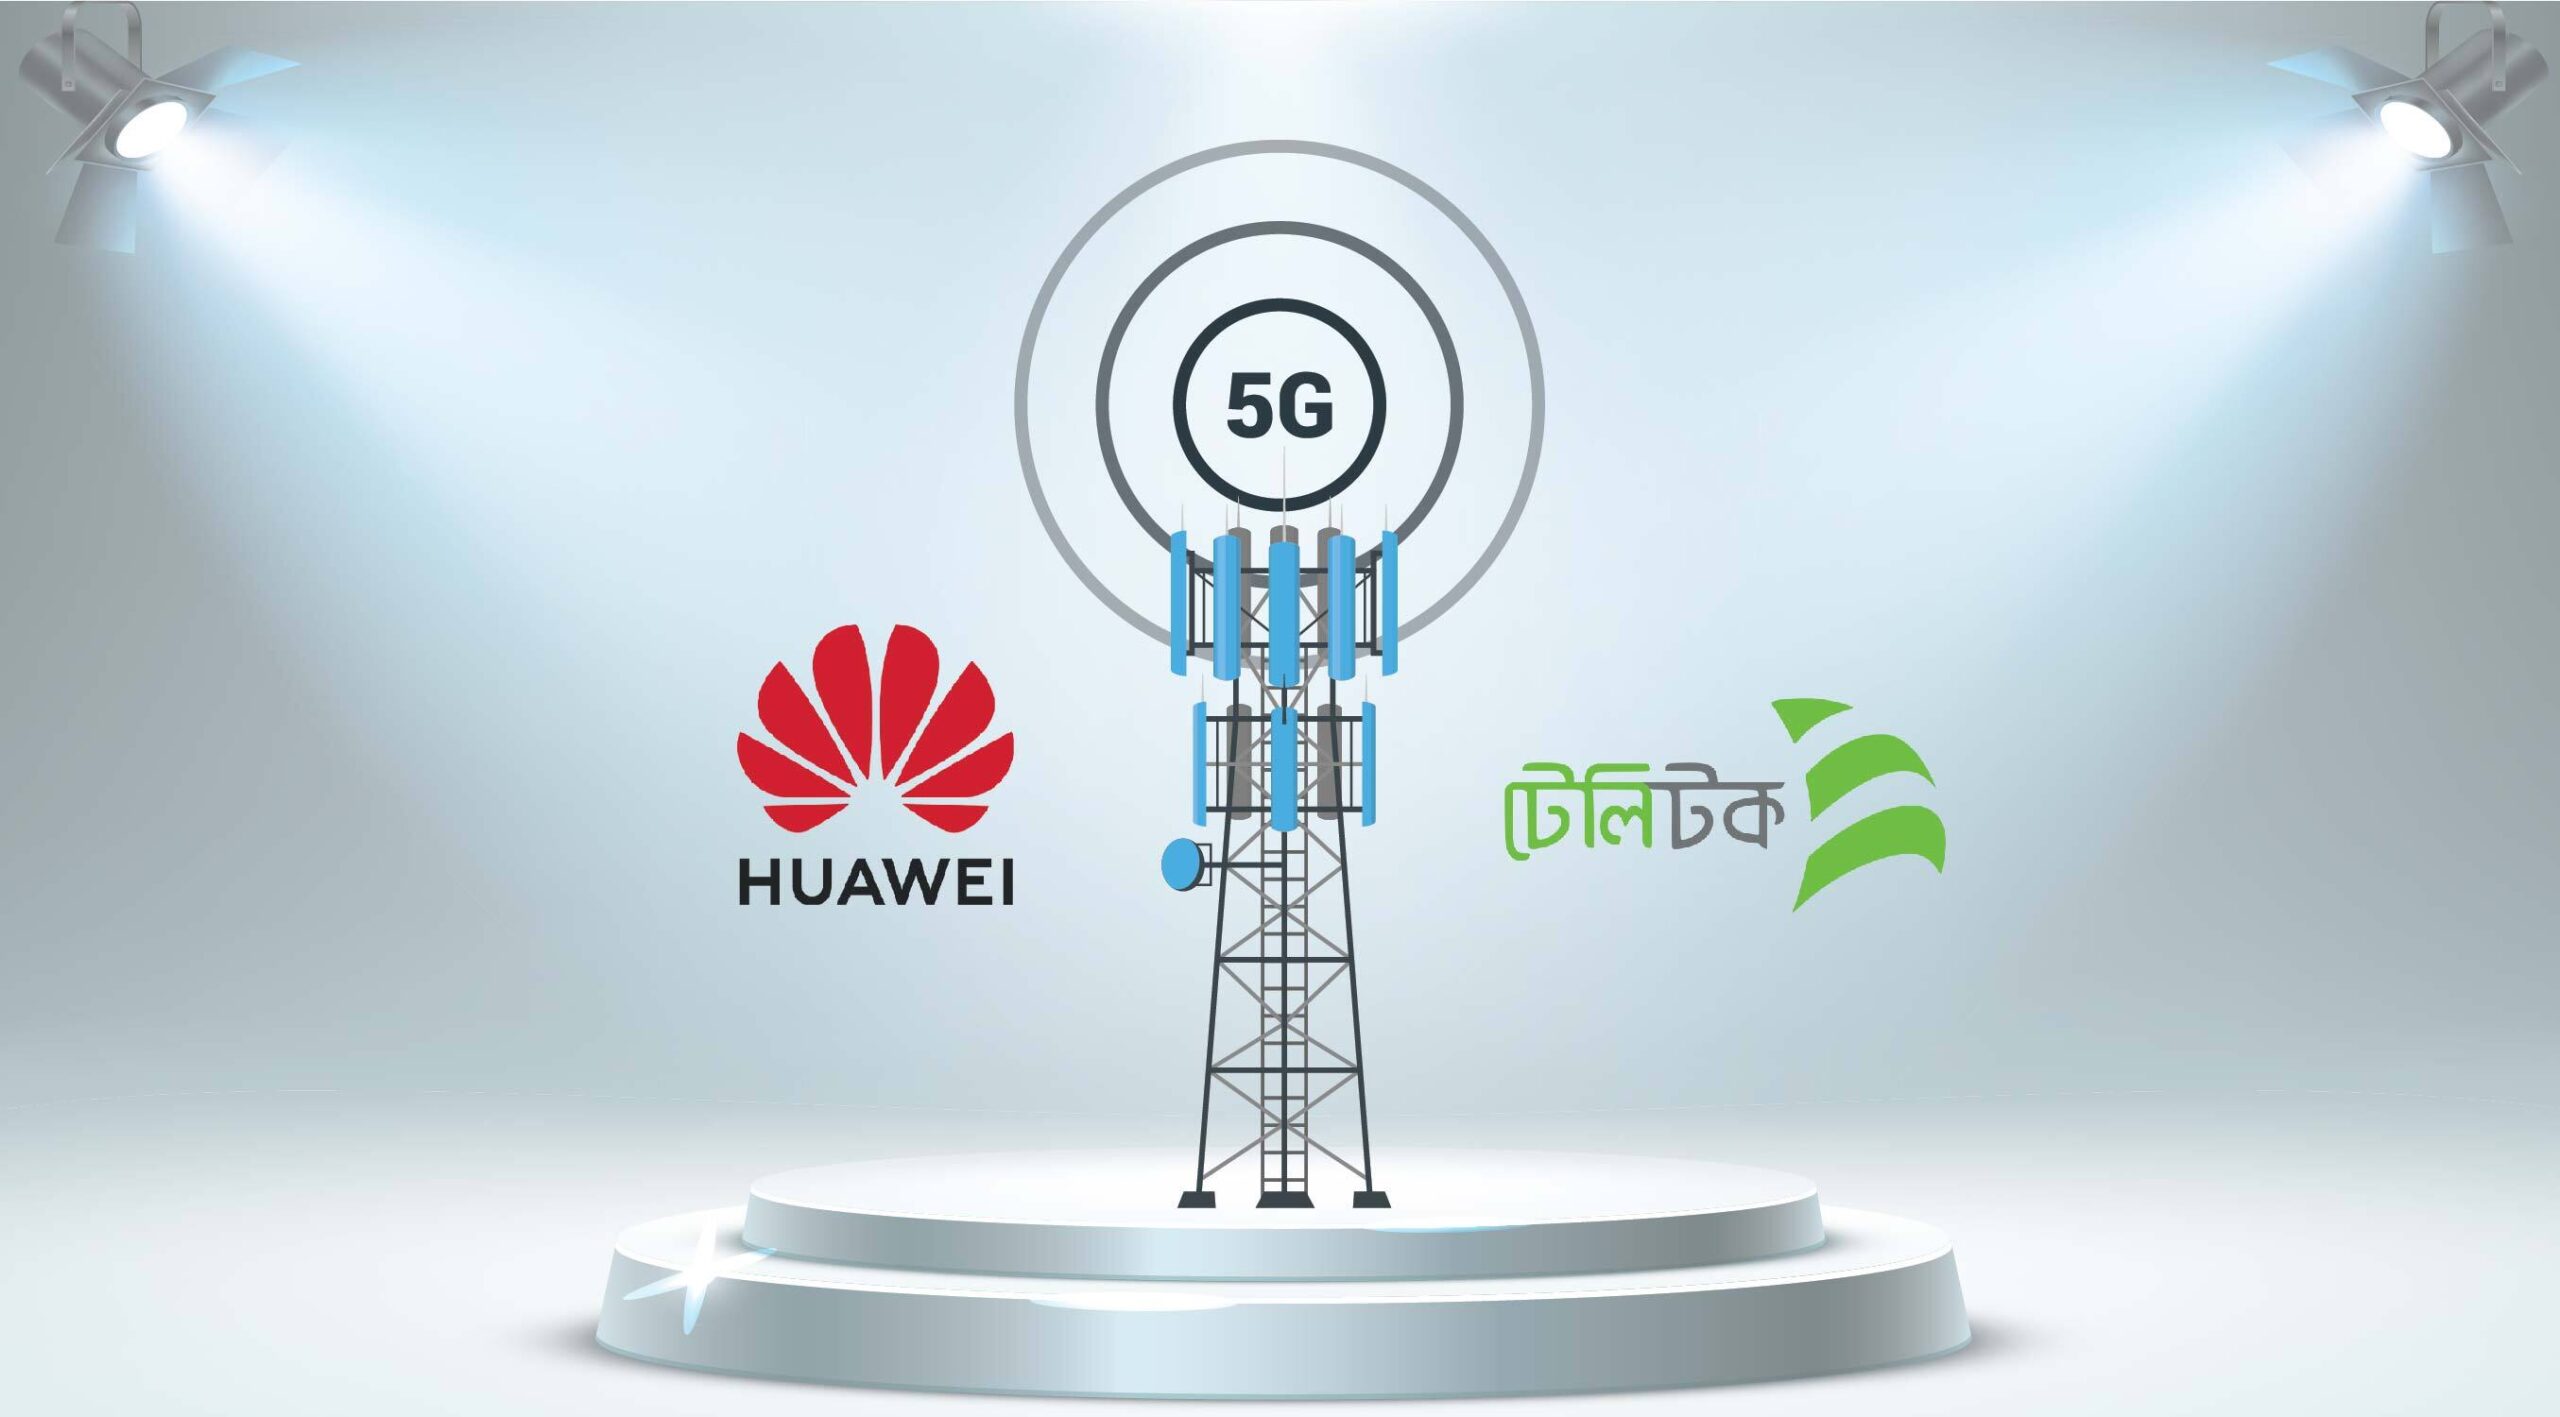 Bangladesh is Going to Launch 5G Network